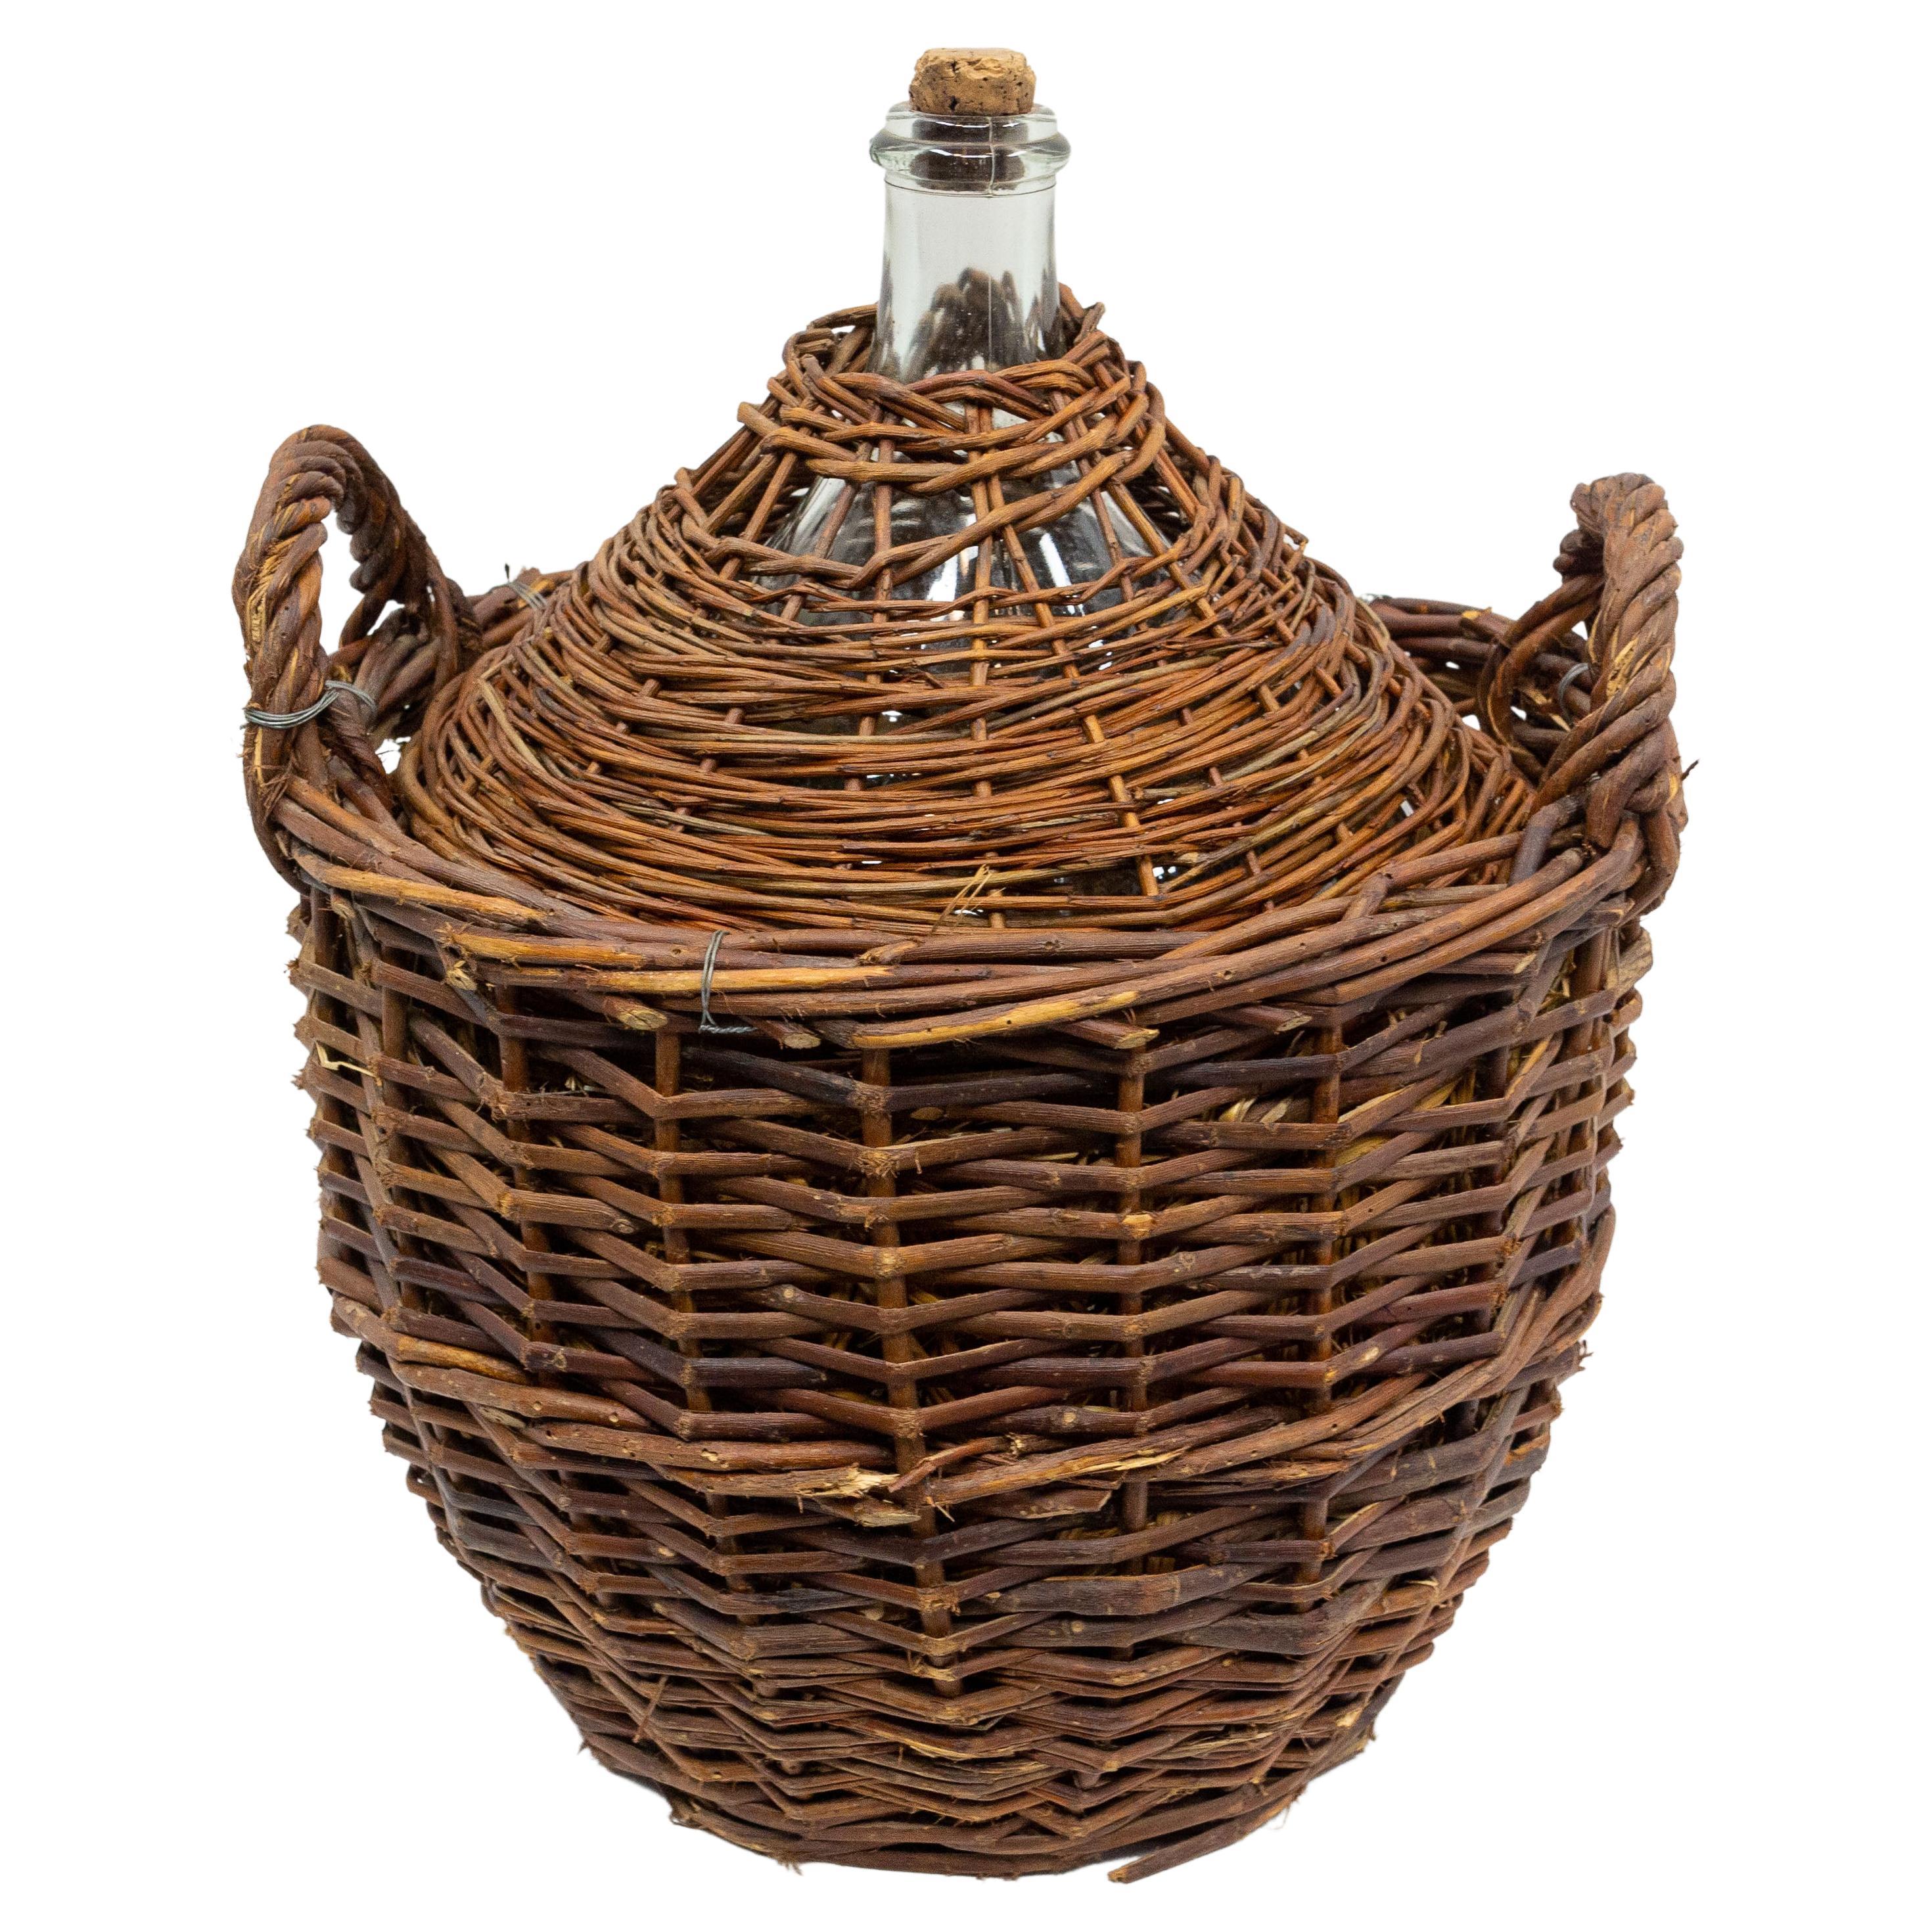 Antique Whiteglass Bottle Demijohns or Carboy in Authentic Wicker Basket, France